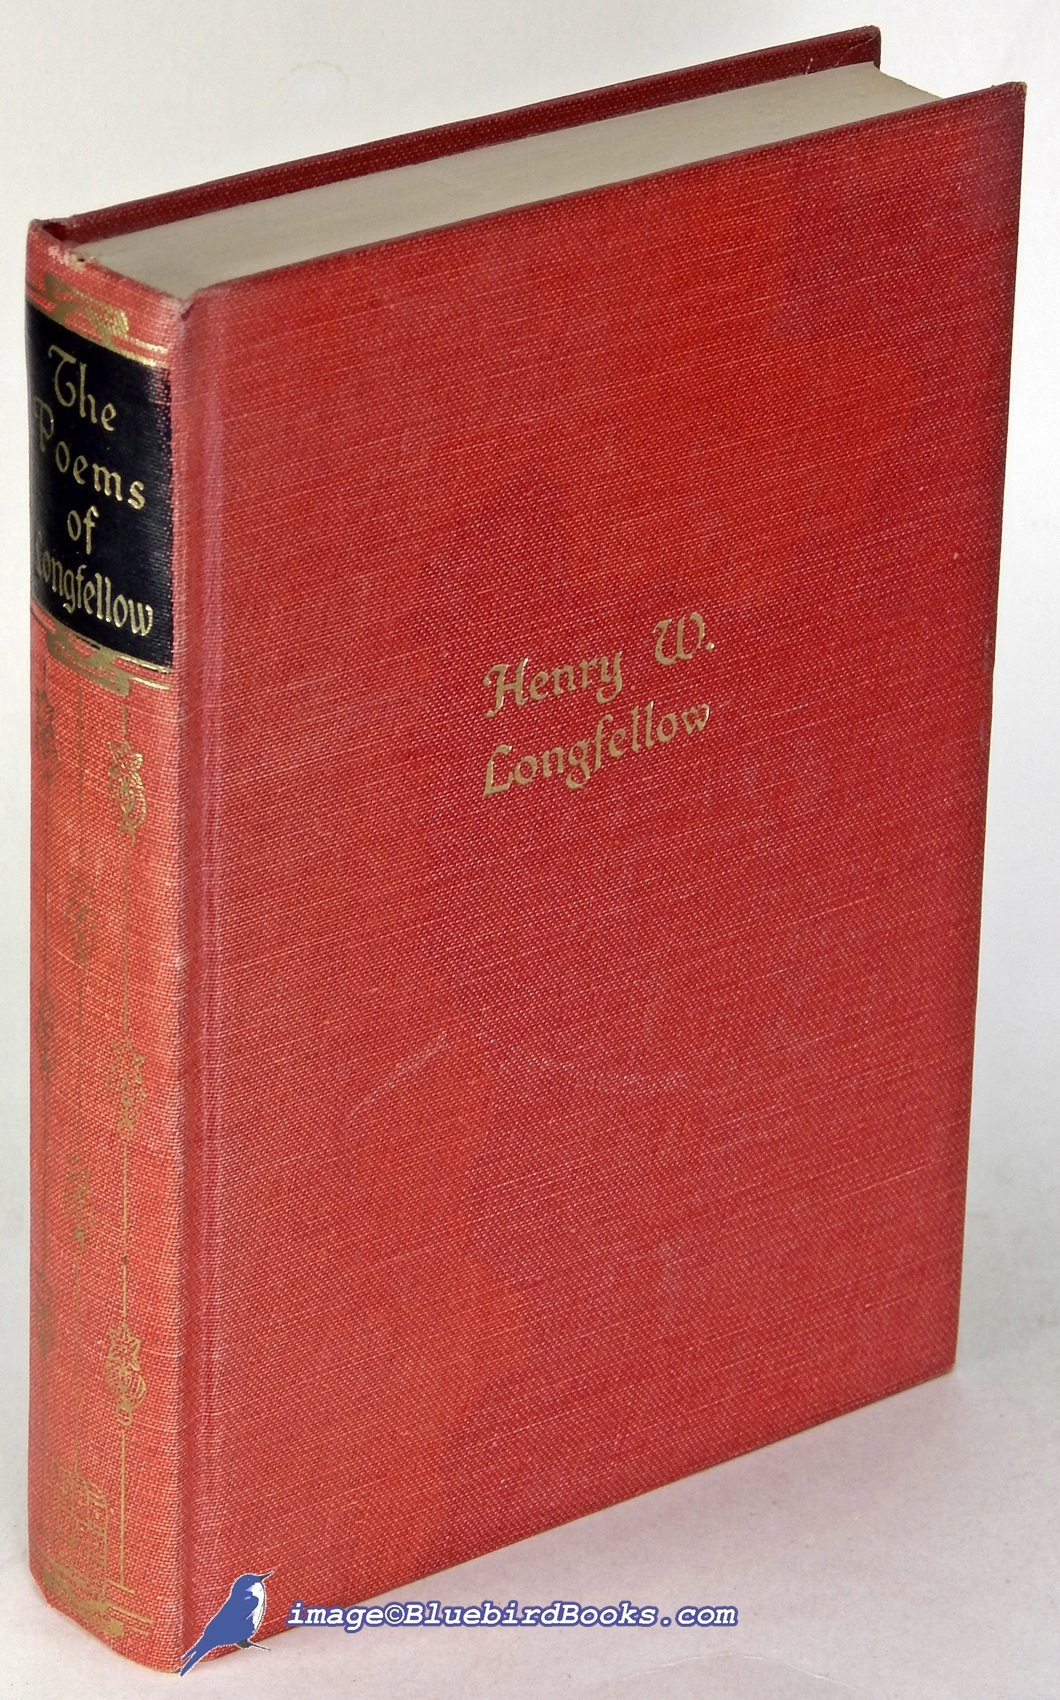 LONGFELLOW, HENRY WADSWORTH - The Poems of Henry Wadsworth Longfellow